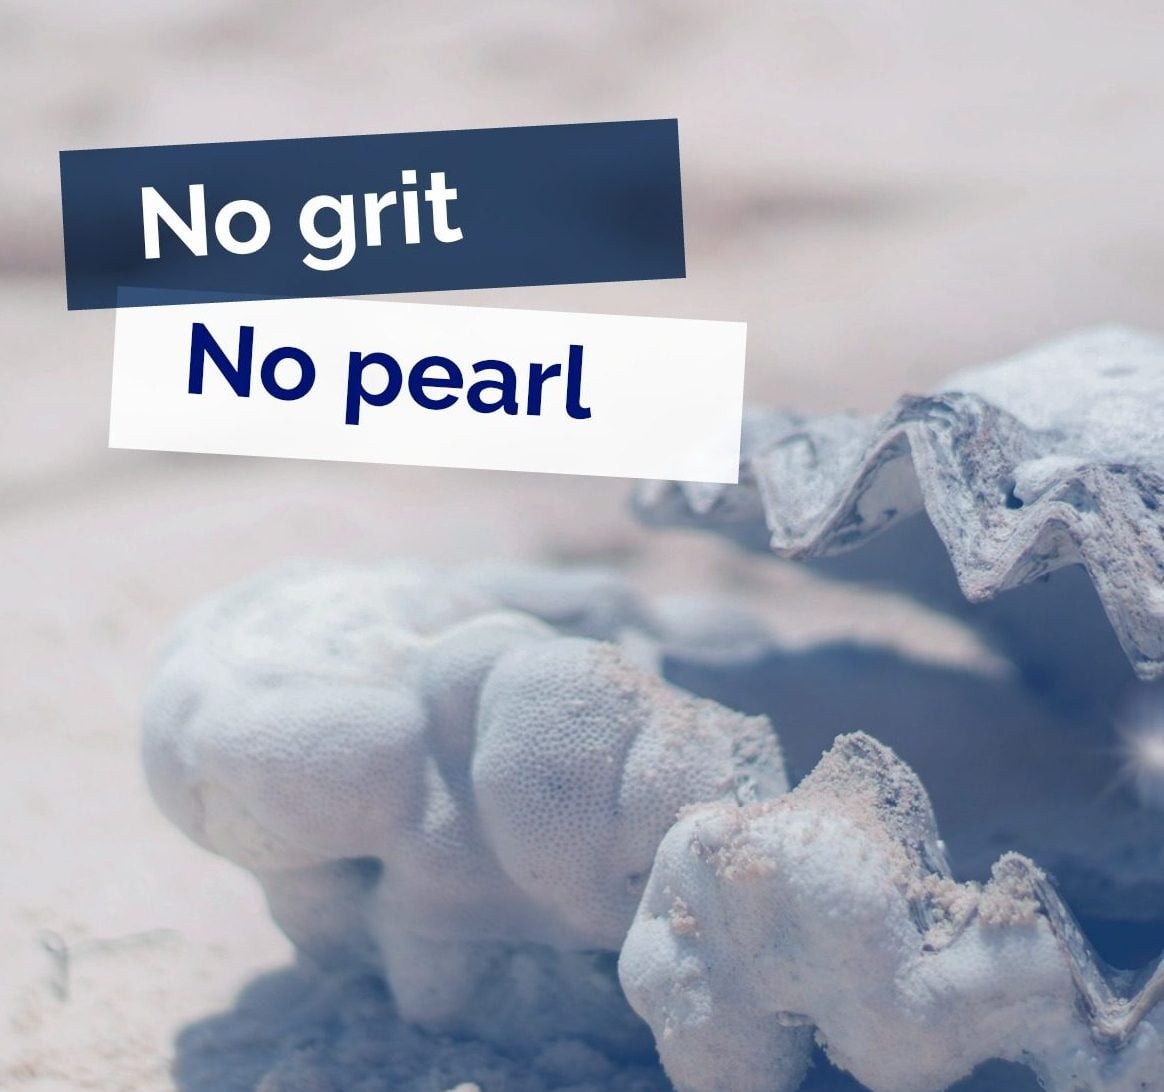 Grit for kids: Why we want it and how we get it